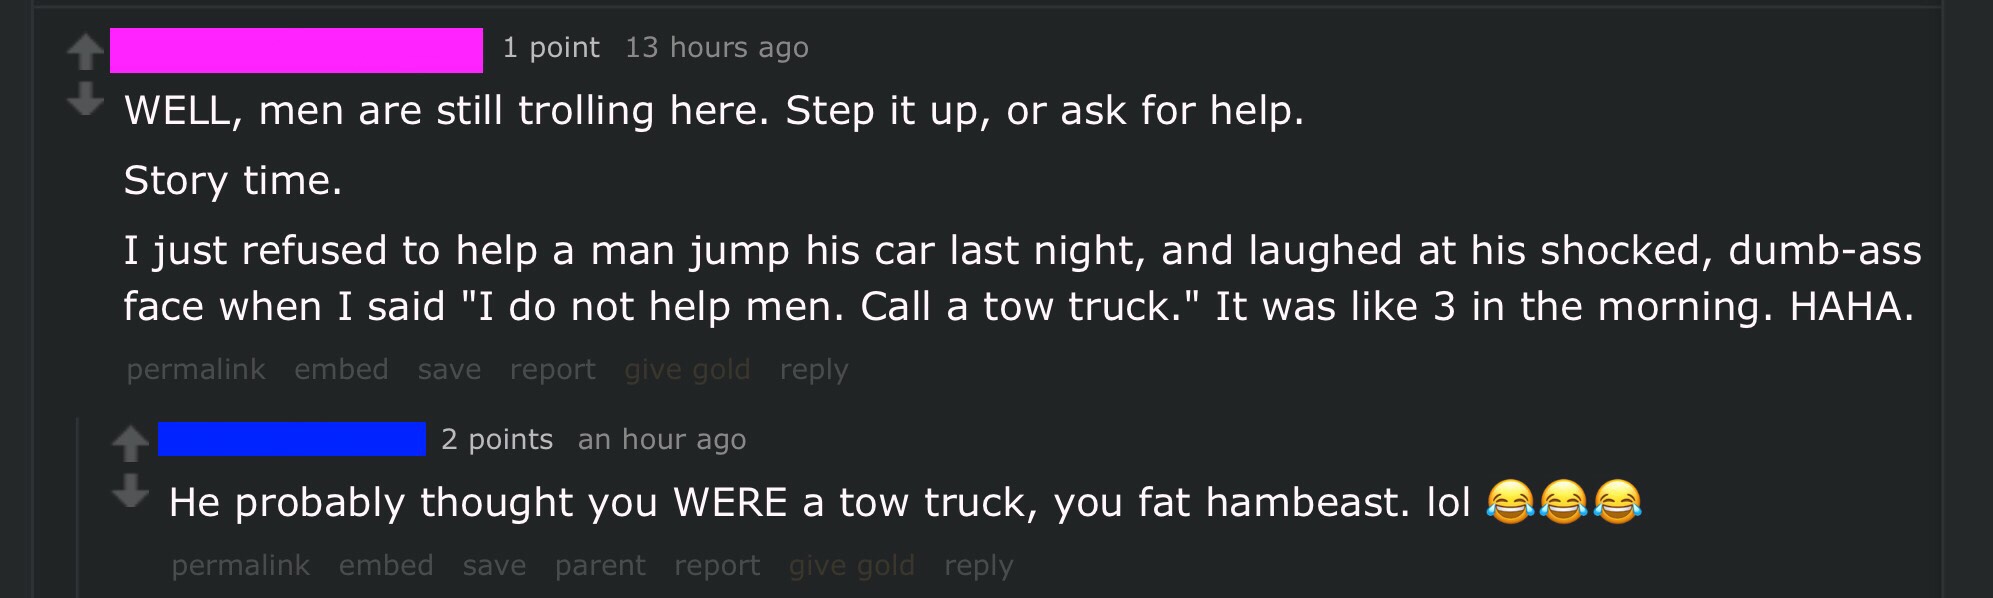 software - '1 point 13 hours ago Well, men are still trolling here. Step it up, or ask for help. Story time. I just refused to help a man jump his car last night, and laughed at his shocked, dumbass face when I said "I do not help men. Call a tow truck." 